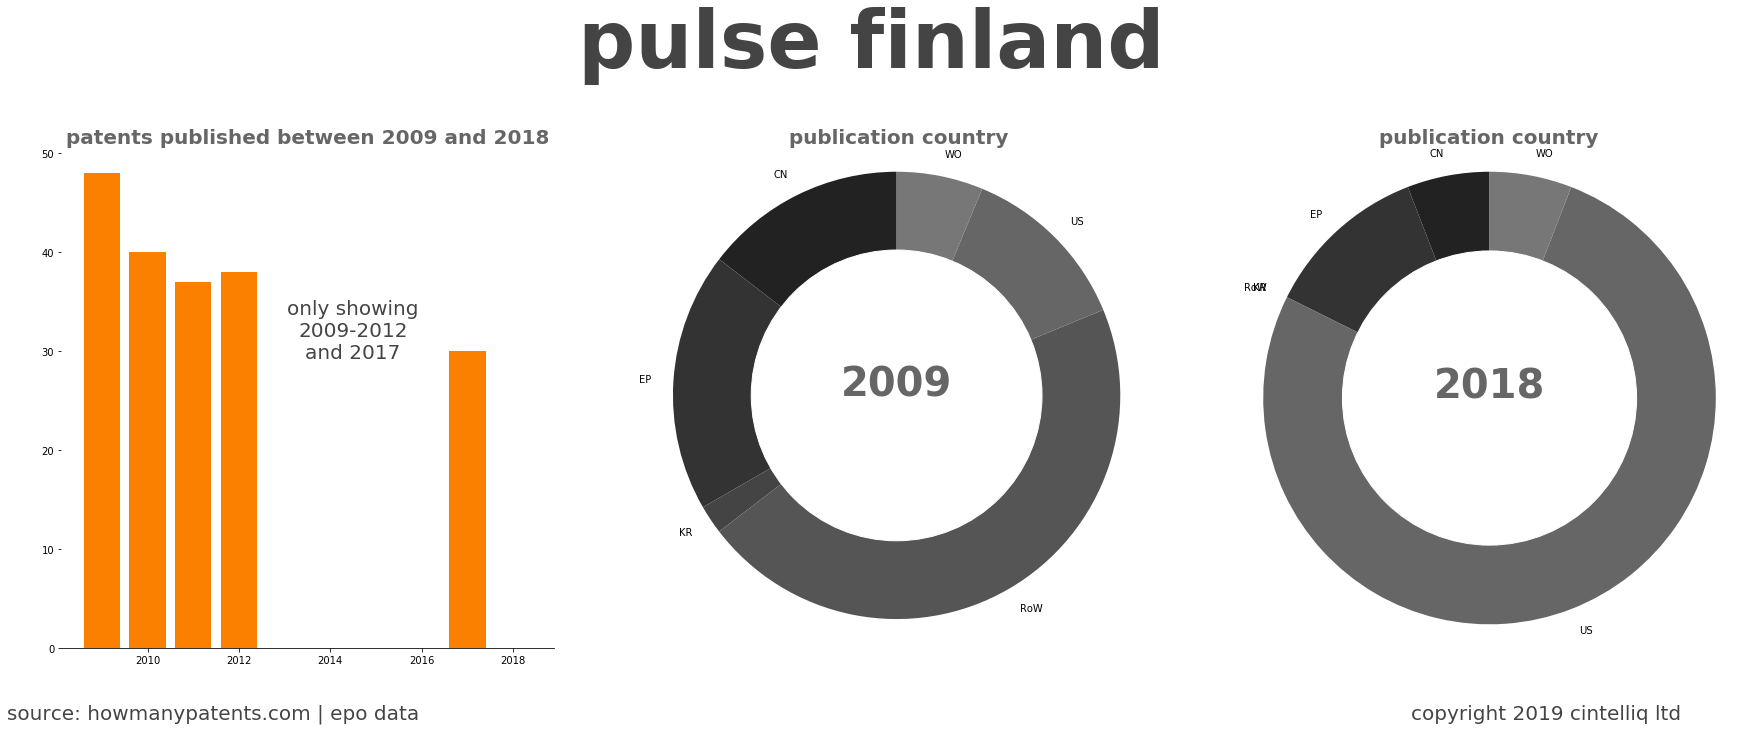 summary of patents for Pulse Finland